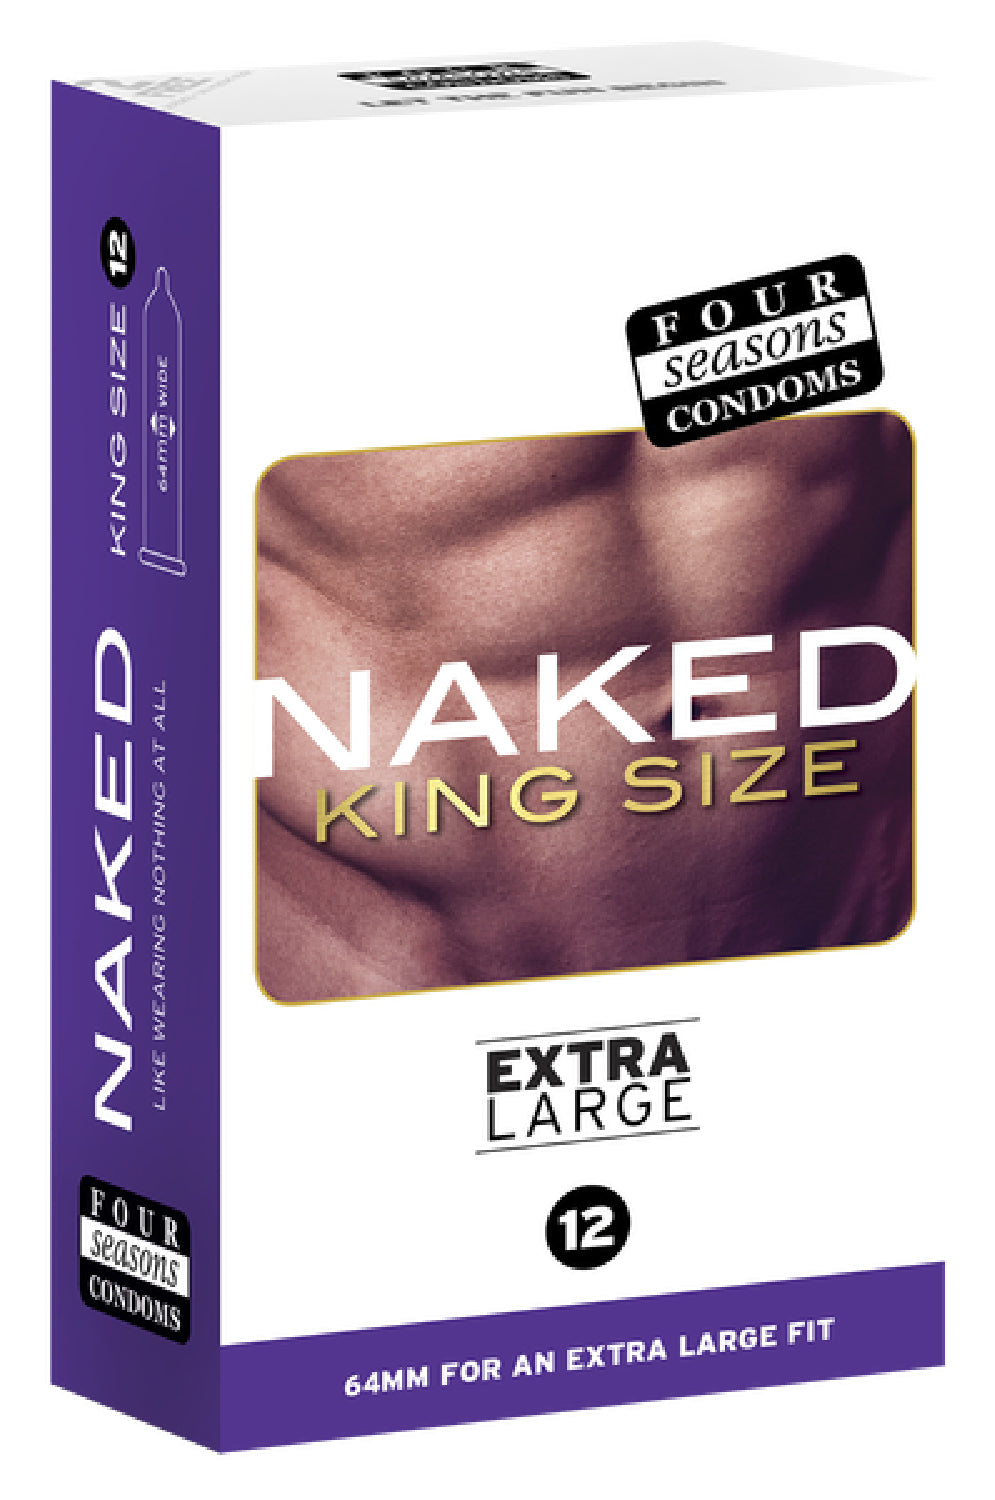 Naked King Size 12's